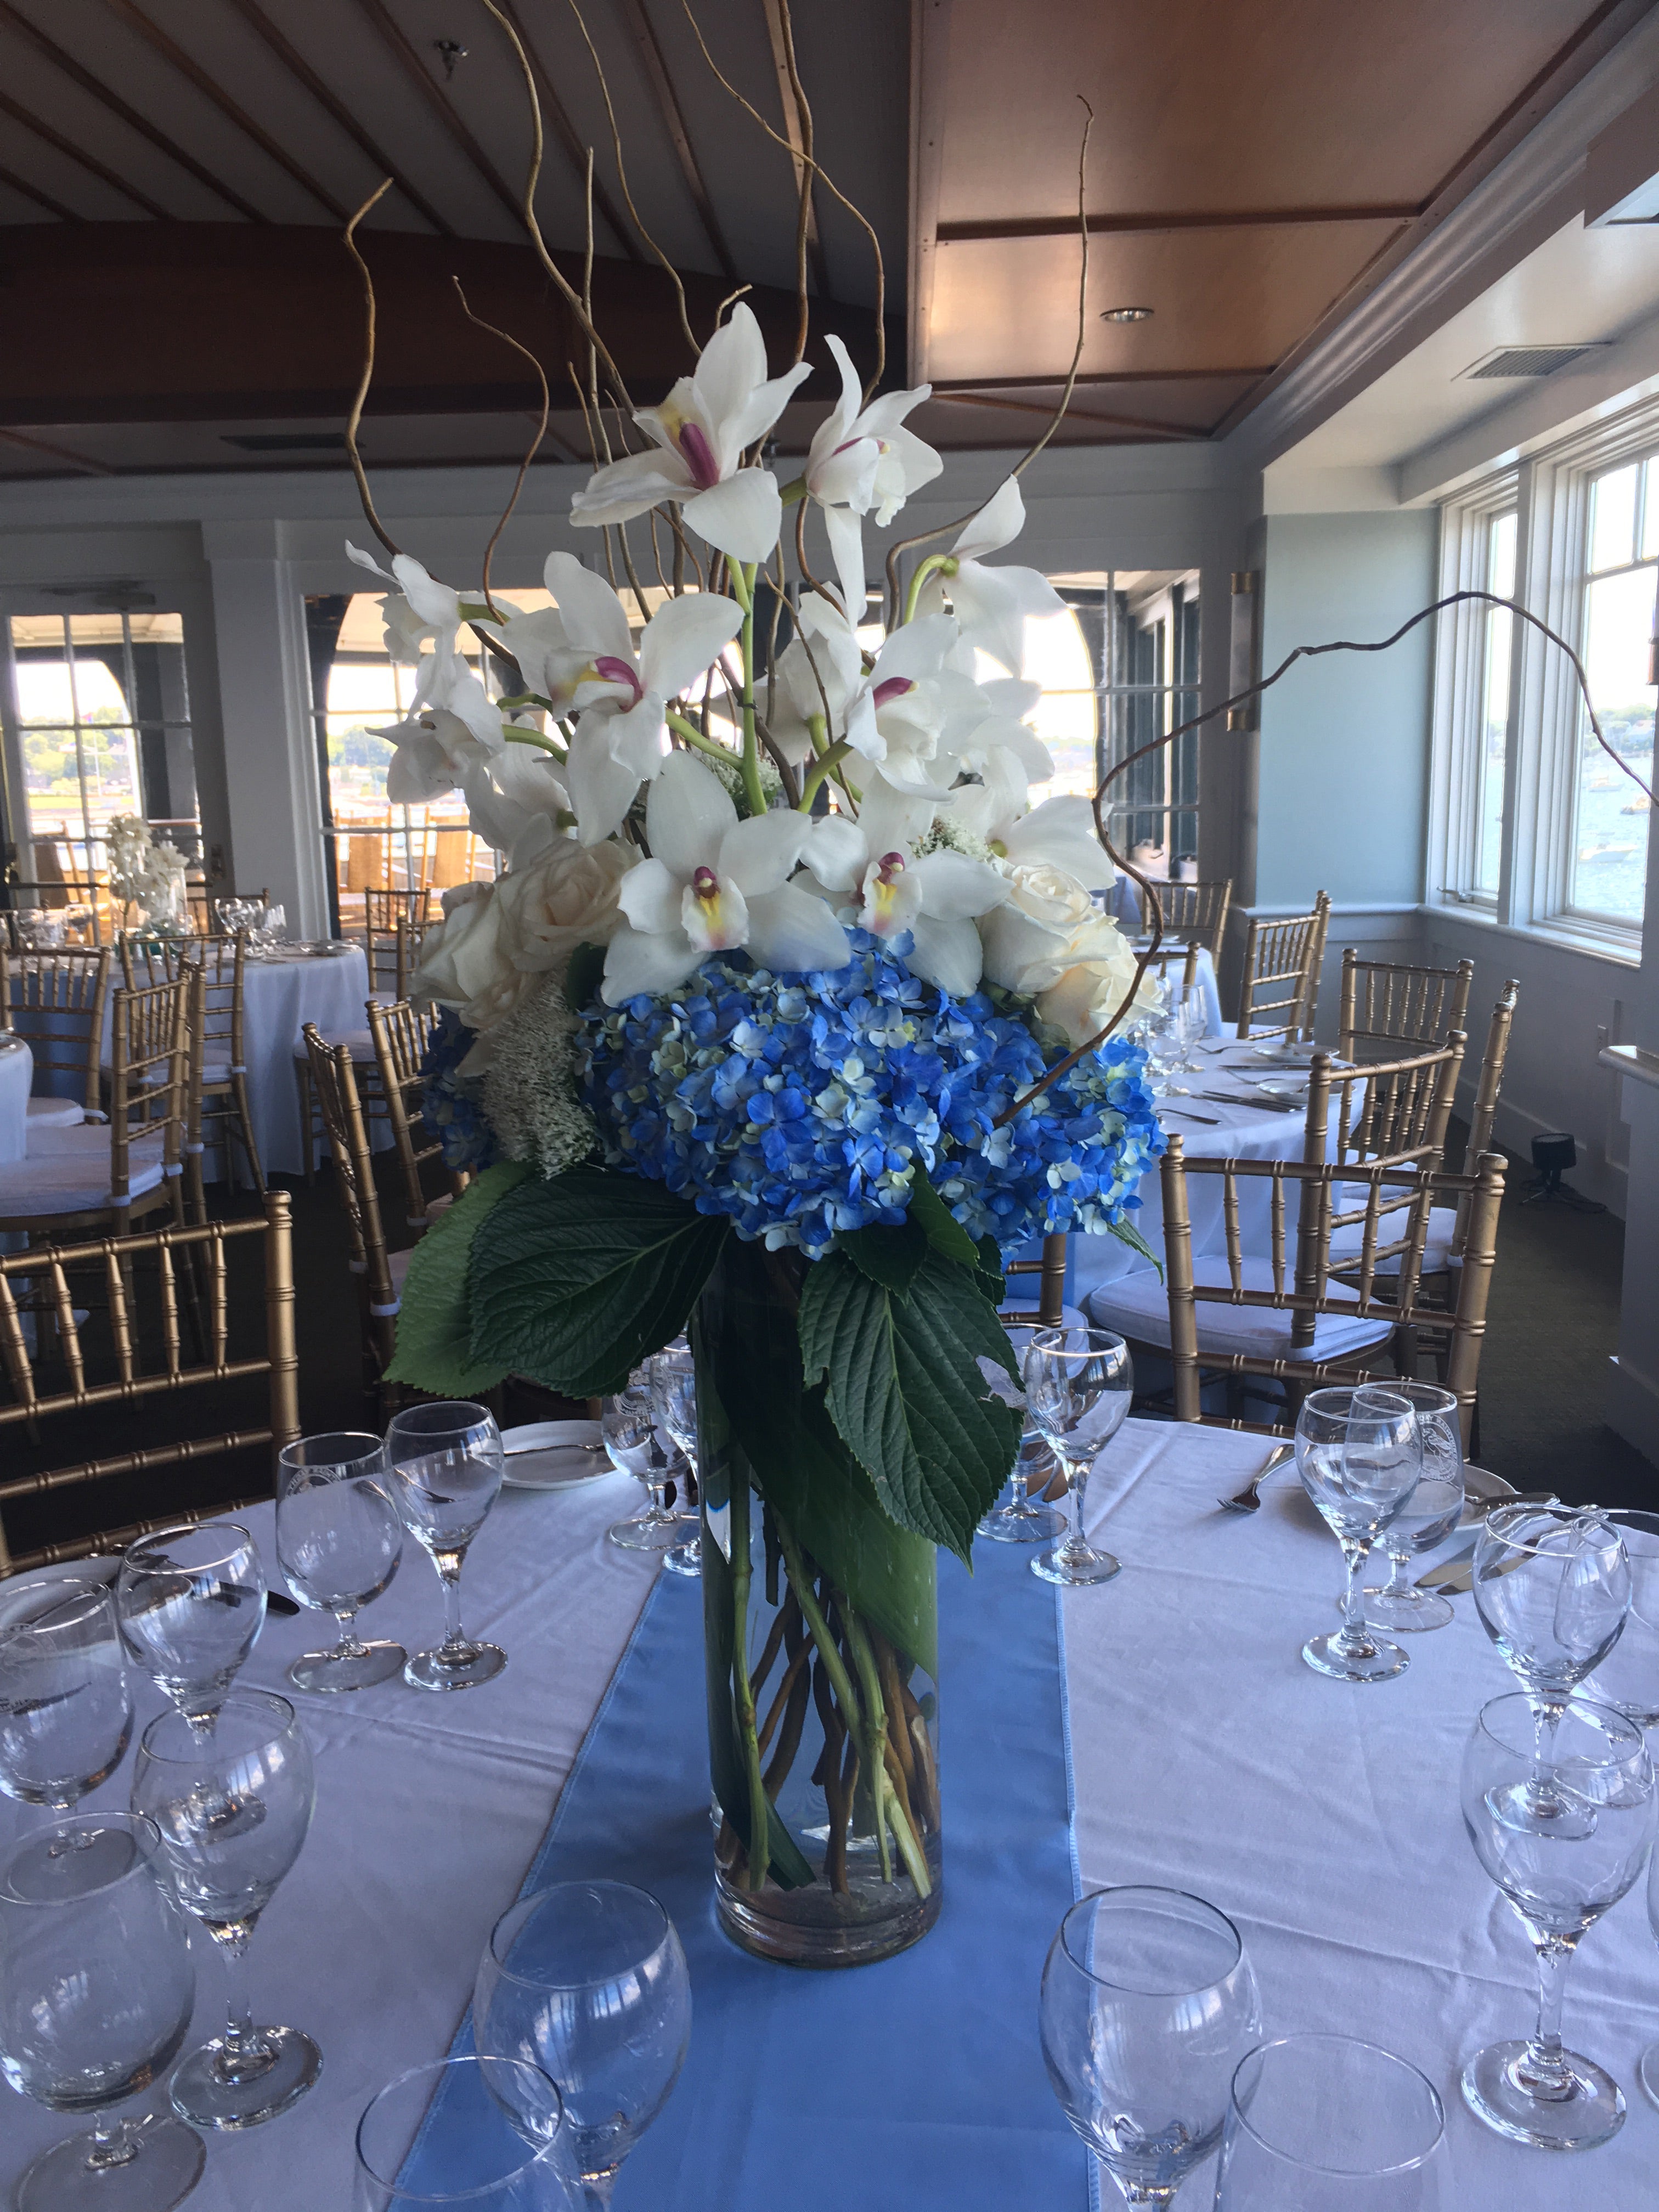 Blue & White Wedding Centerpieces with Cymbidium Orchids and Hydrangeas and Curly Willow